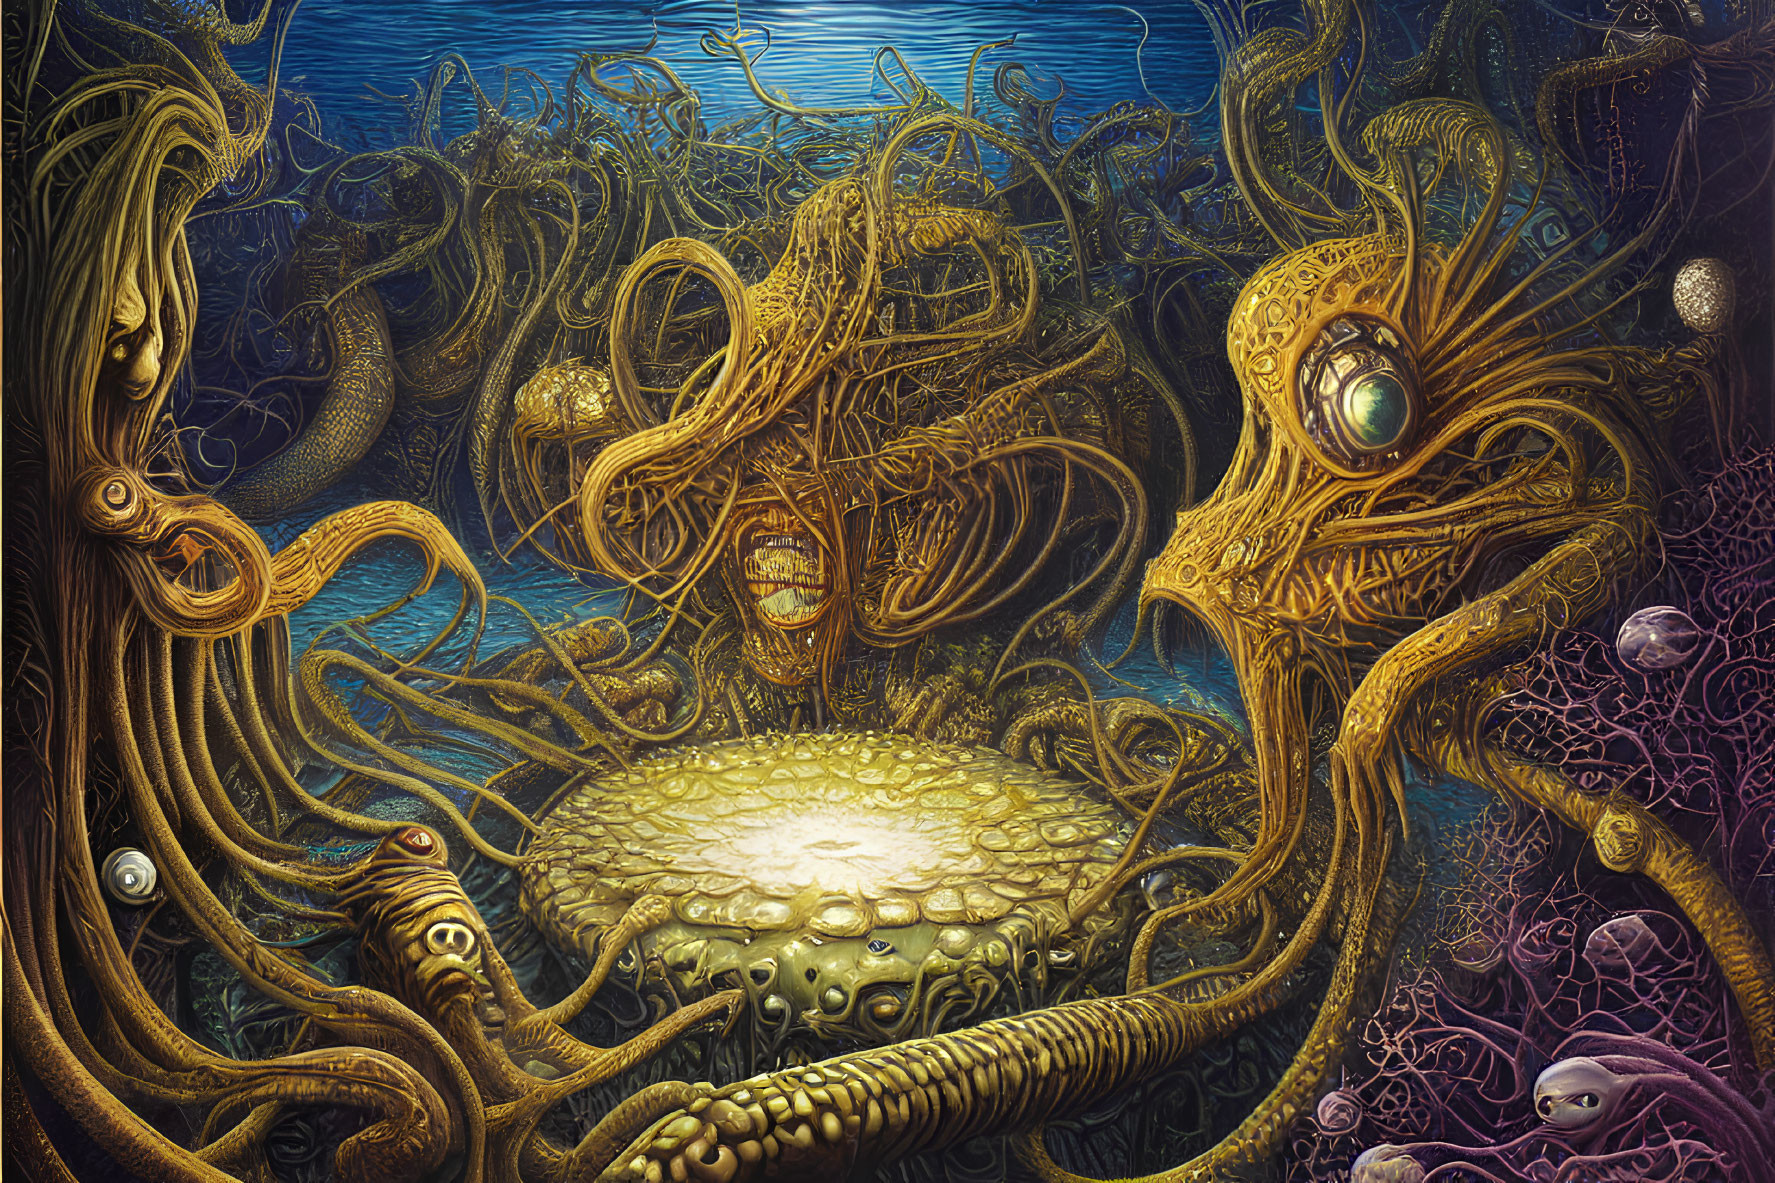 Detailed underwater scene with glowing orb and octopus-like creatures